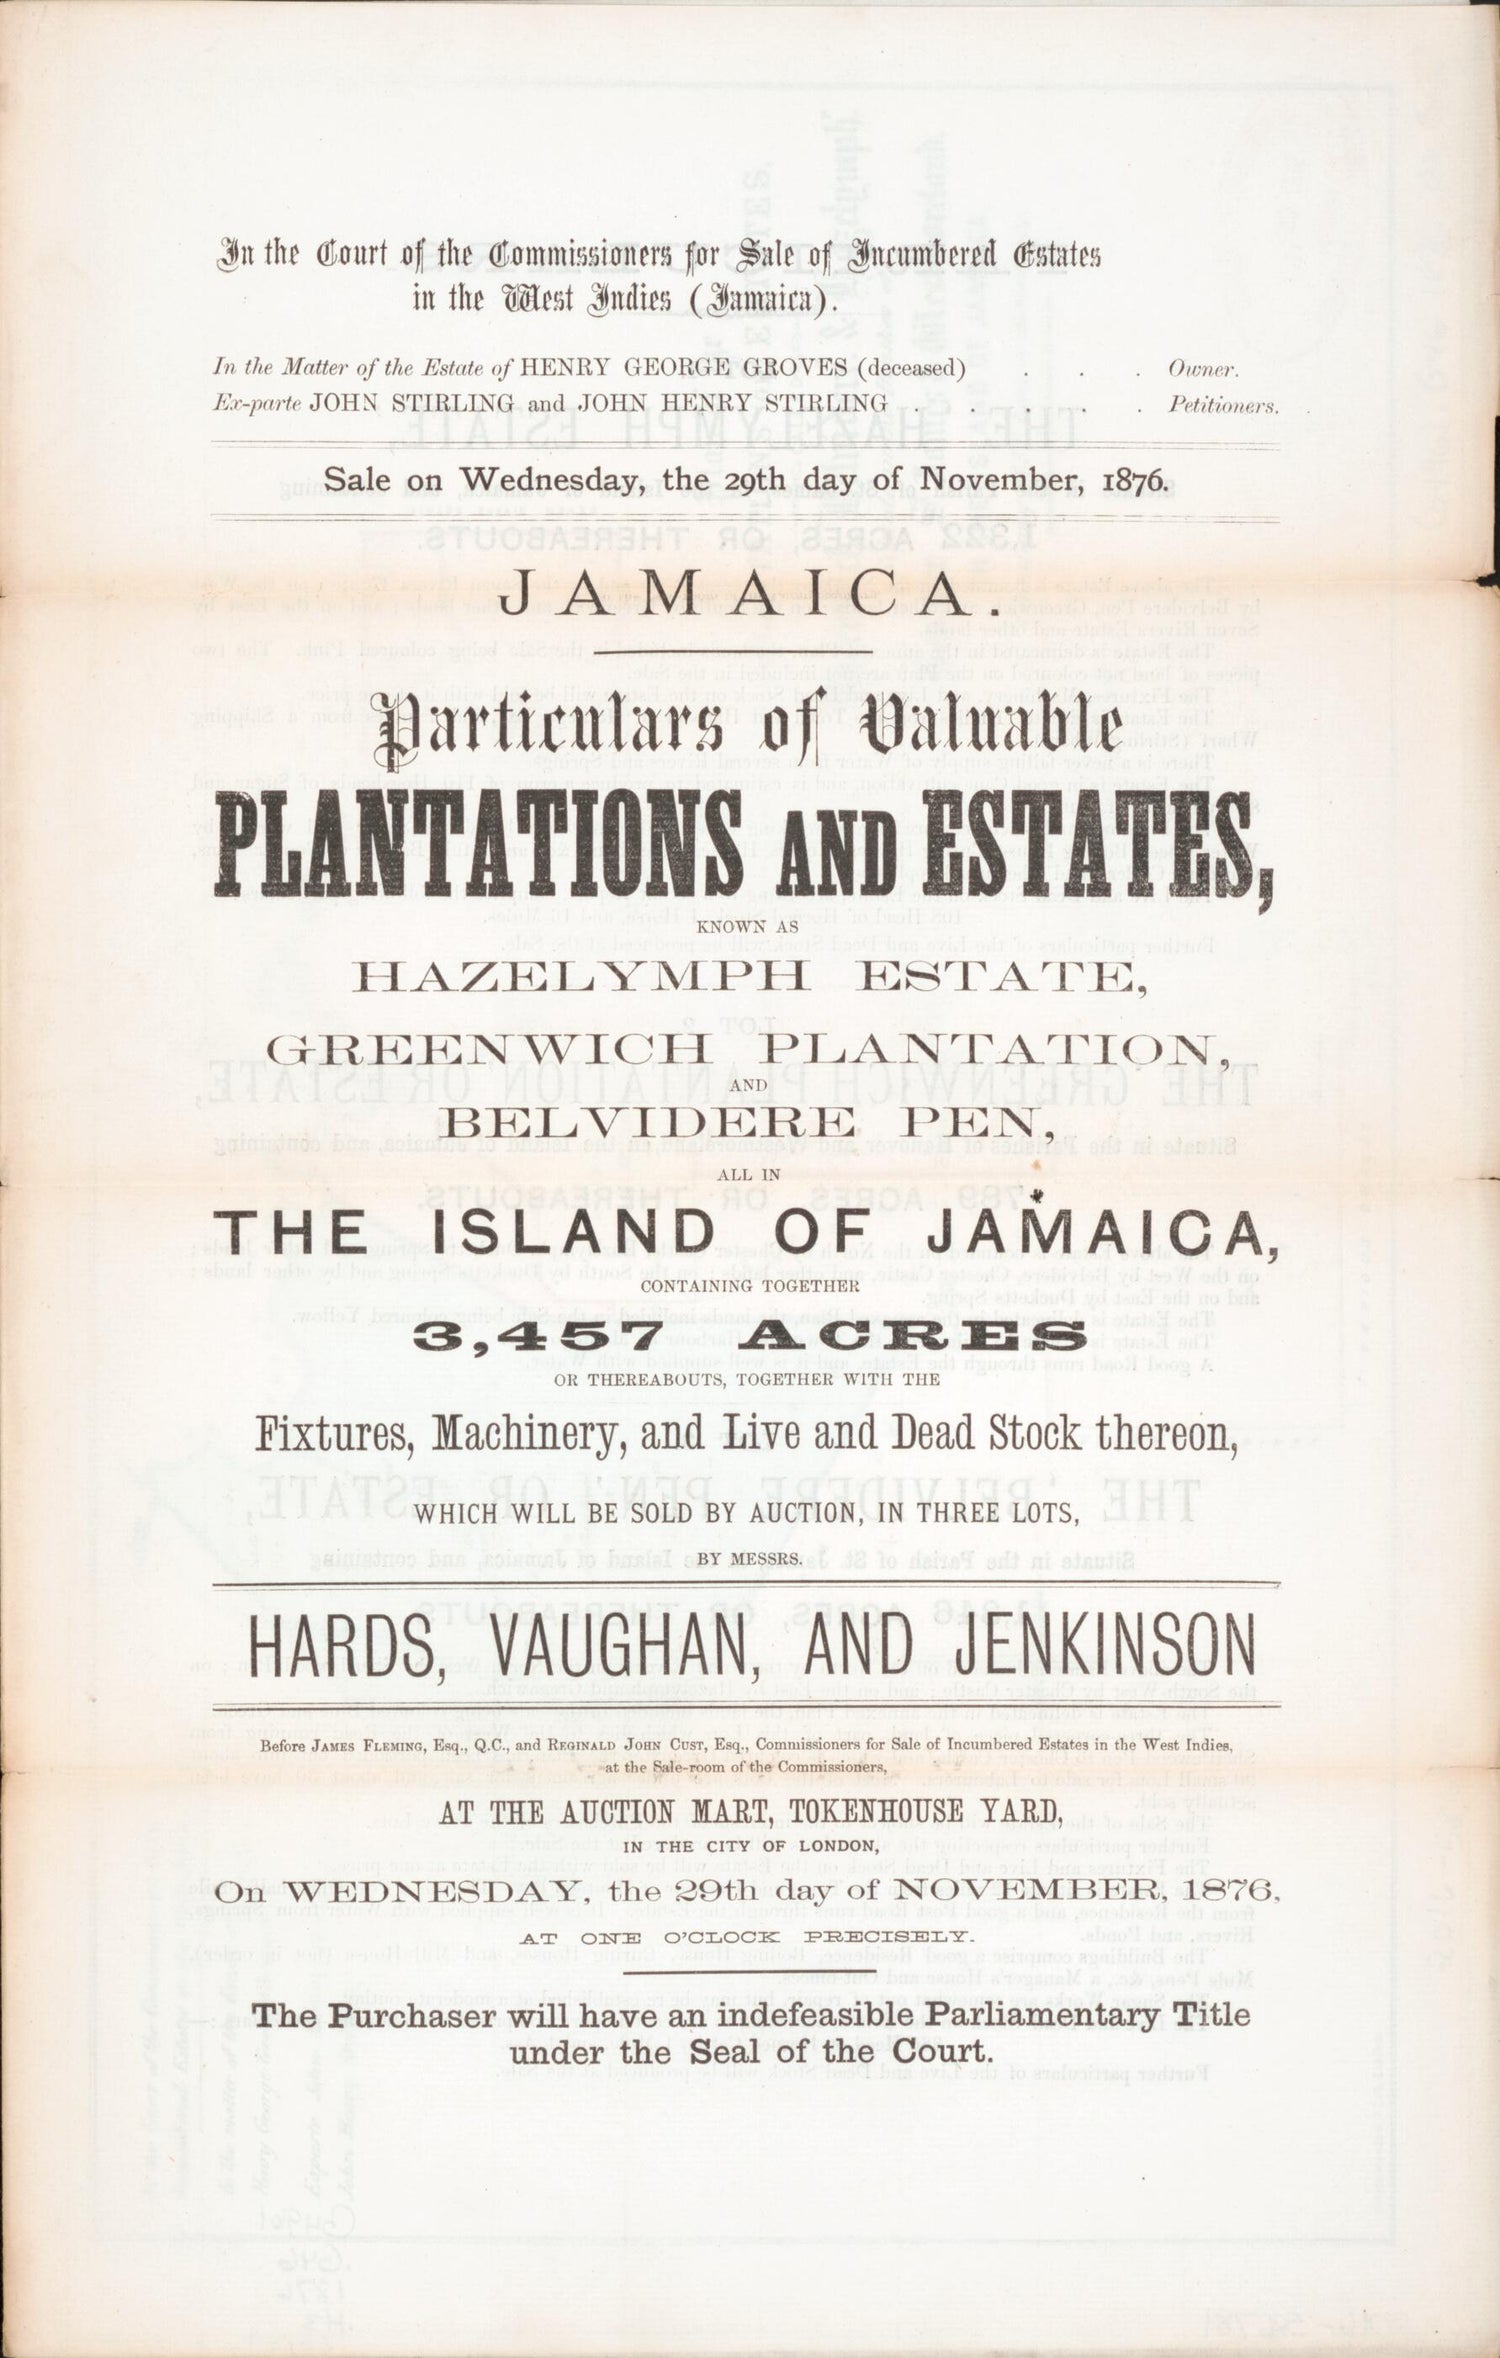 This old map of Jamaica, Particulars of Valuable Plantations and Estates : Known As Hazelymph Estate, Greenwich Plantation, Belvidere Pen, All In the Island of Jamaica, Containing Together 3,457 Acres, Or Thereabouts, Together With the Fixtures, Machiner